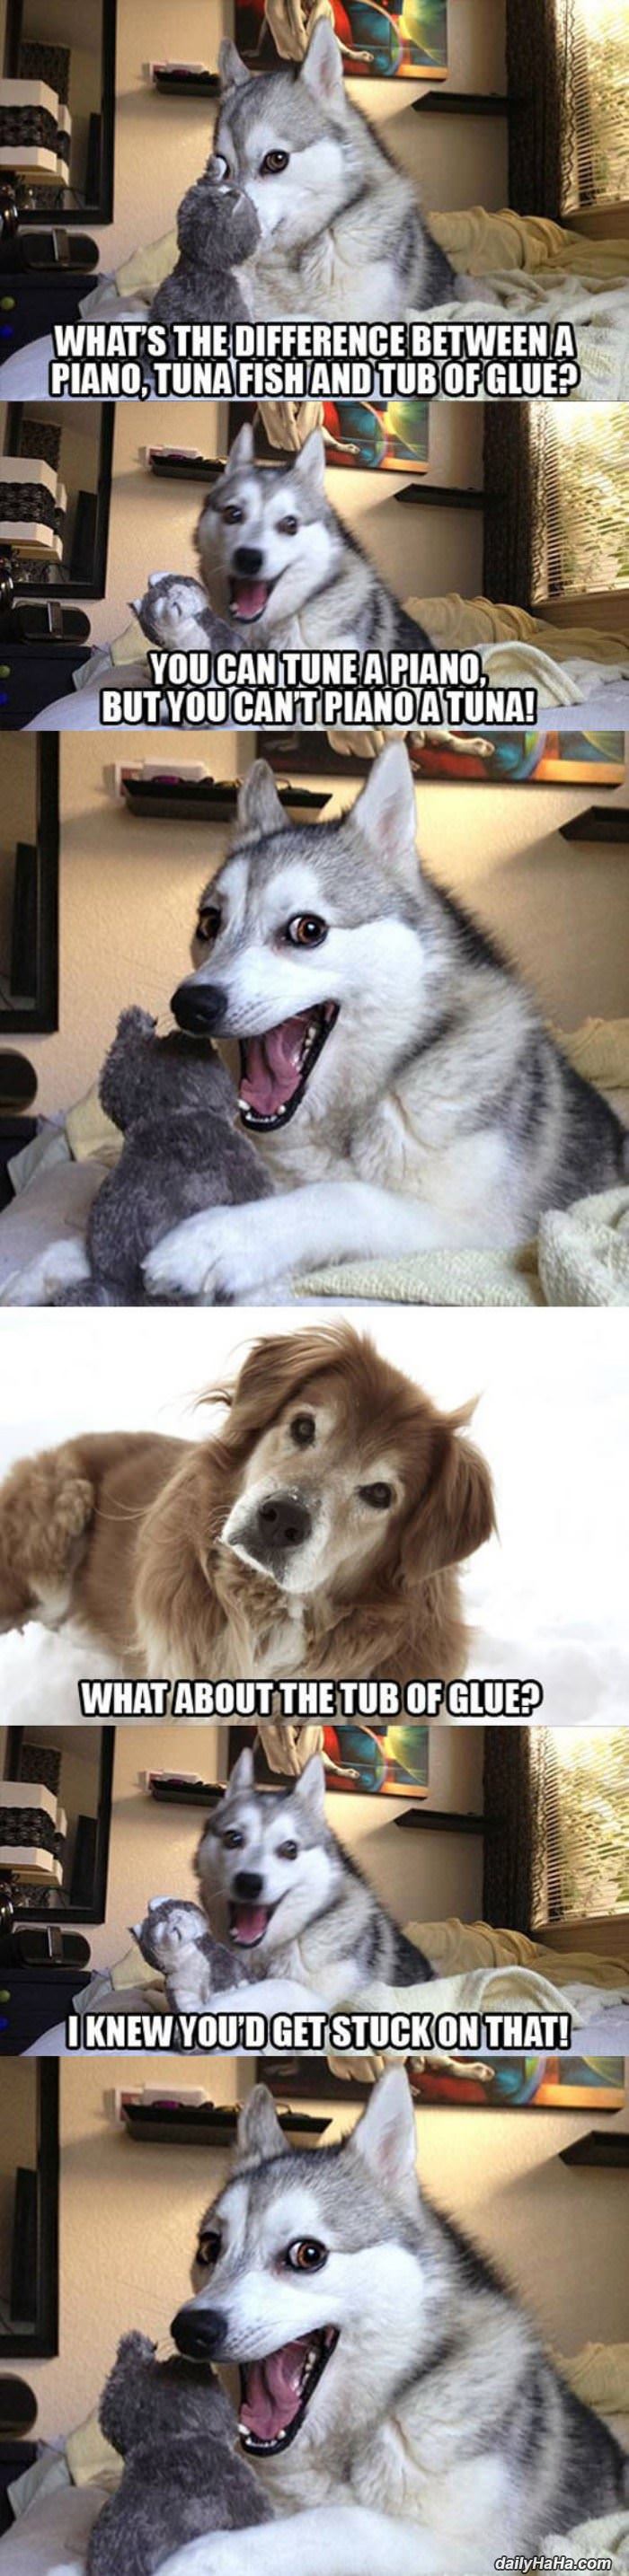 the pun dog funny picture